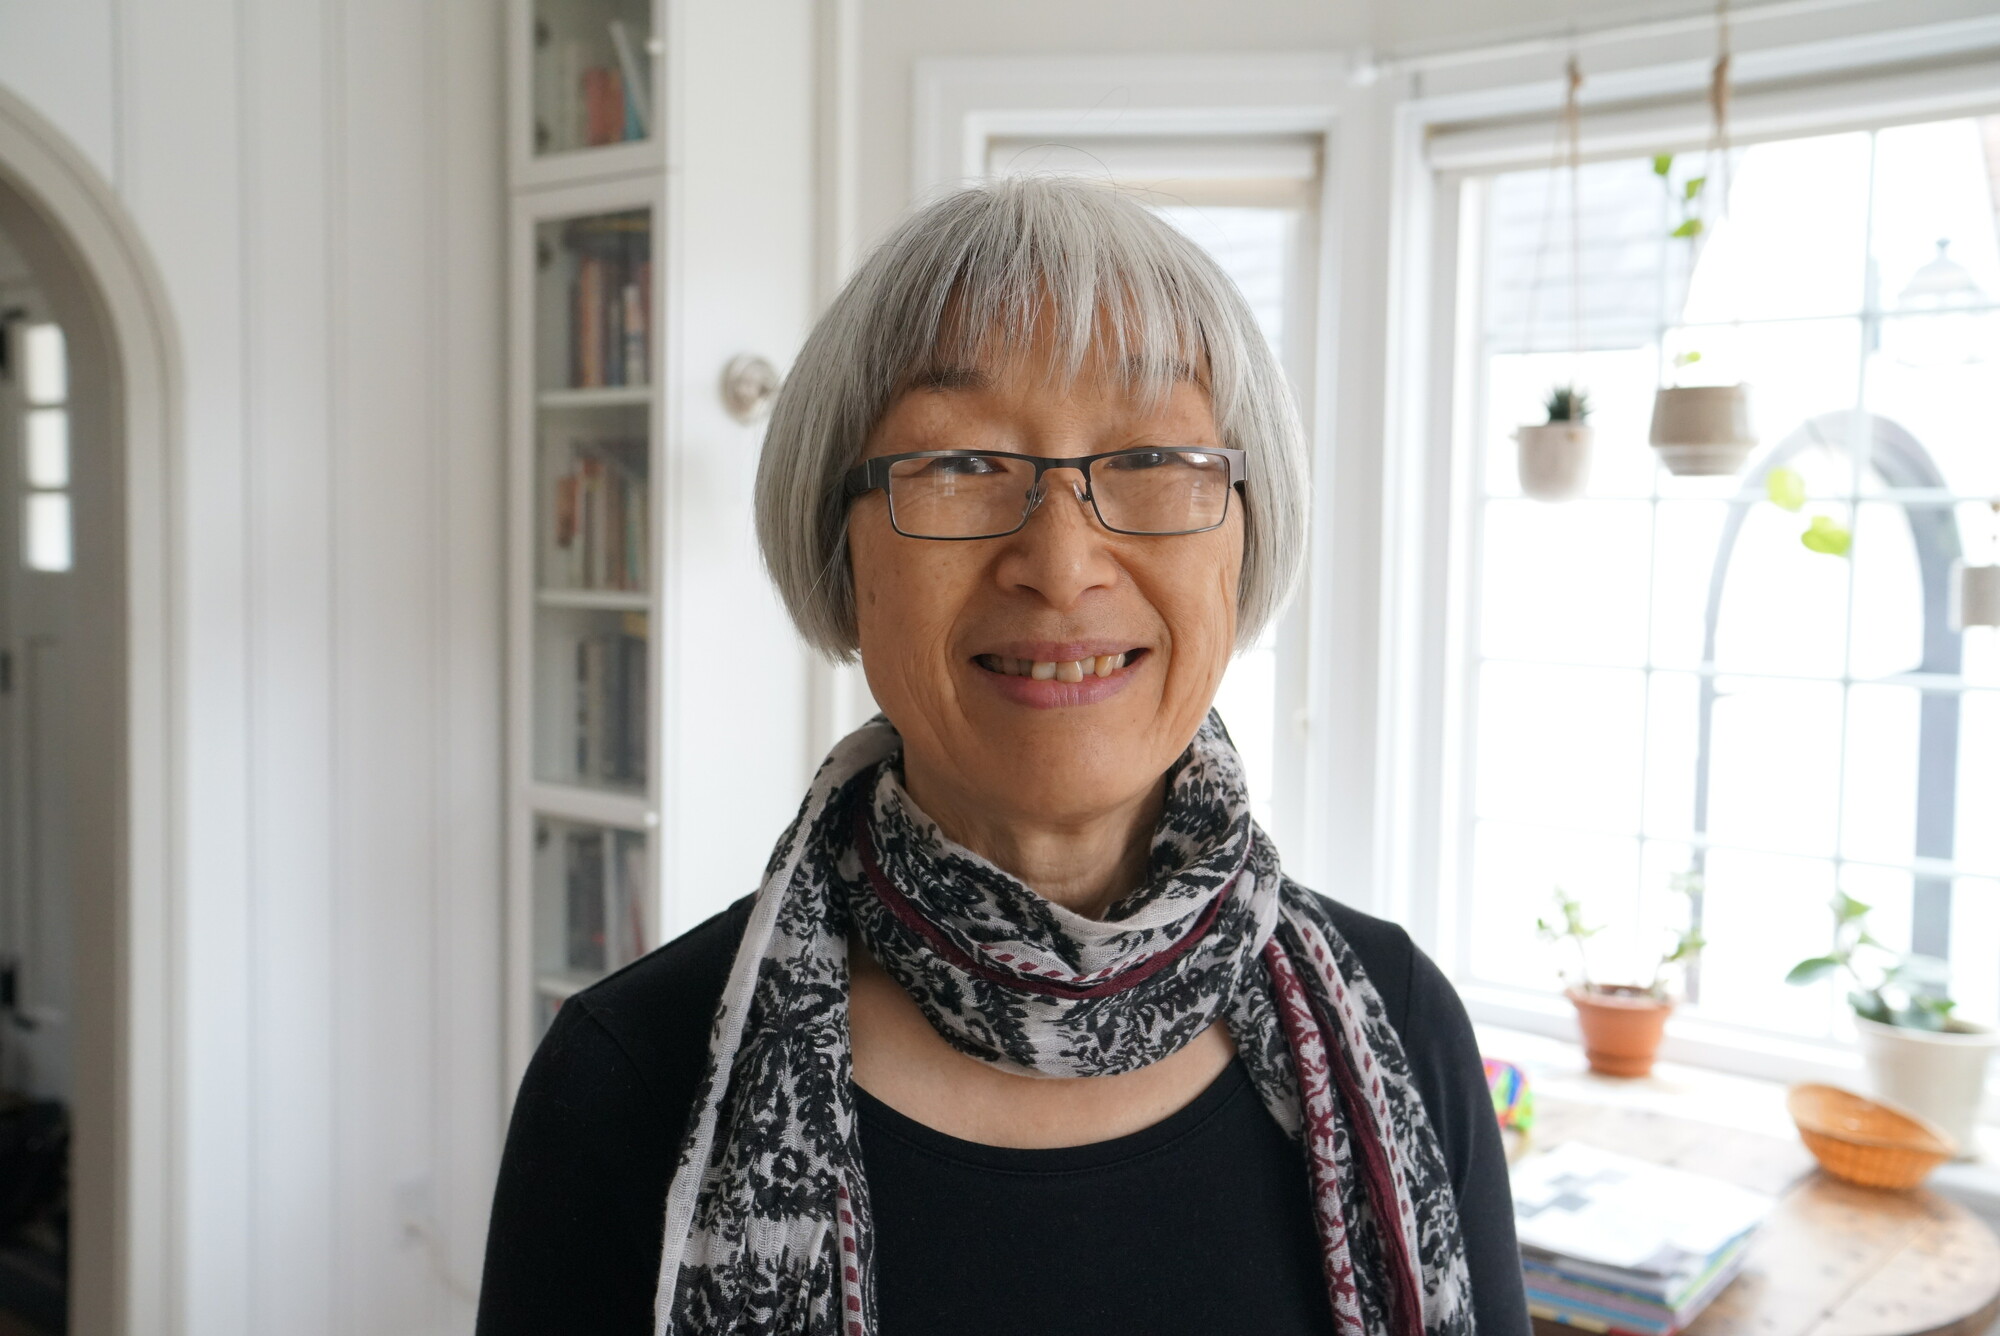 A portrait of an older woman with short grey hair, glasses, wearing a scarf